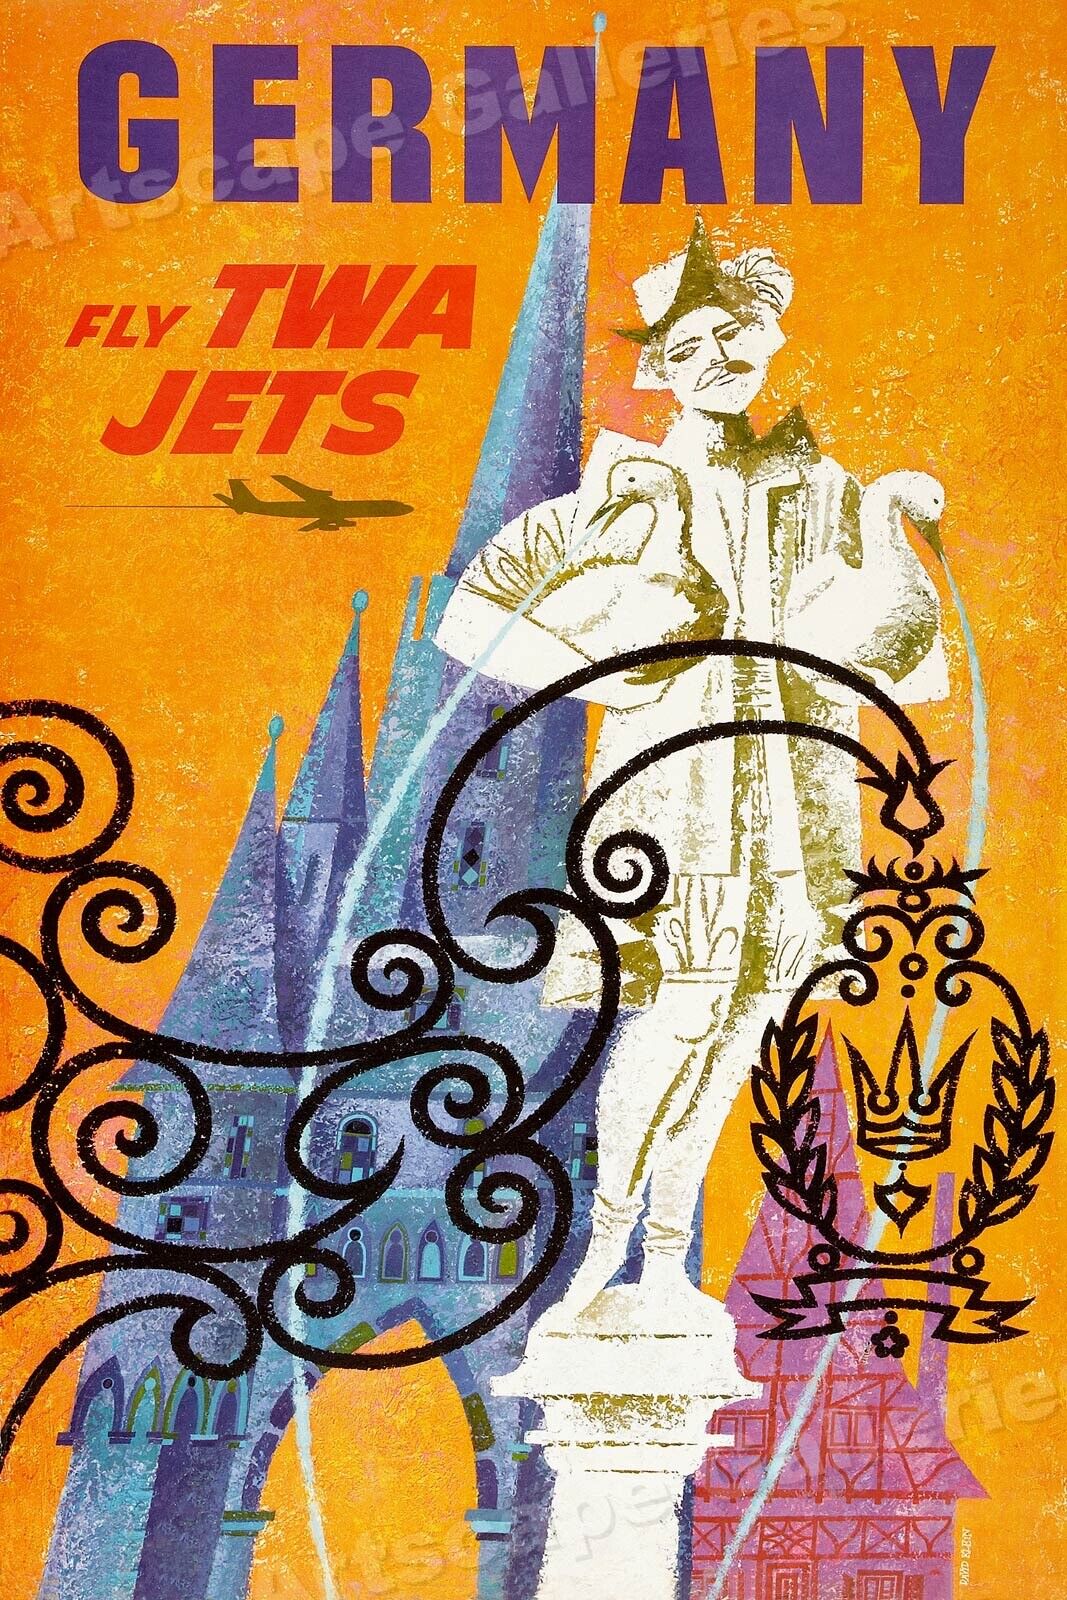 TWA See Germany 1968 Vintage Style Jet Travel Poster - 16x24